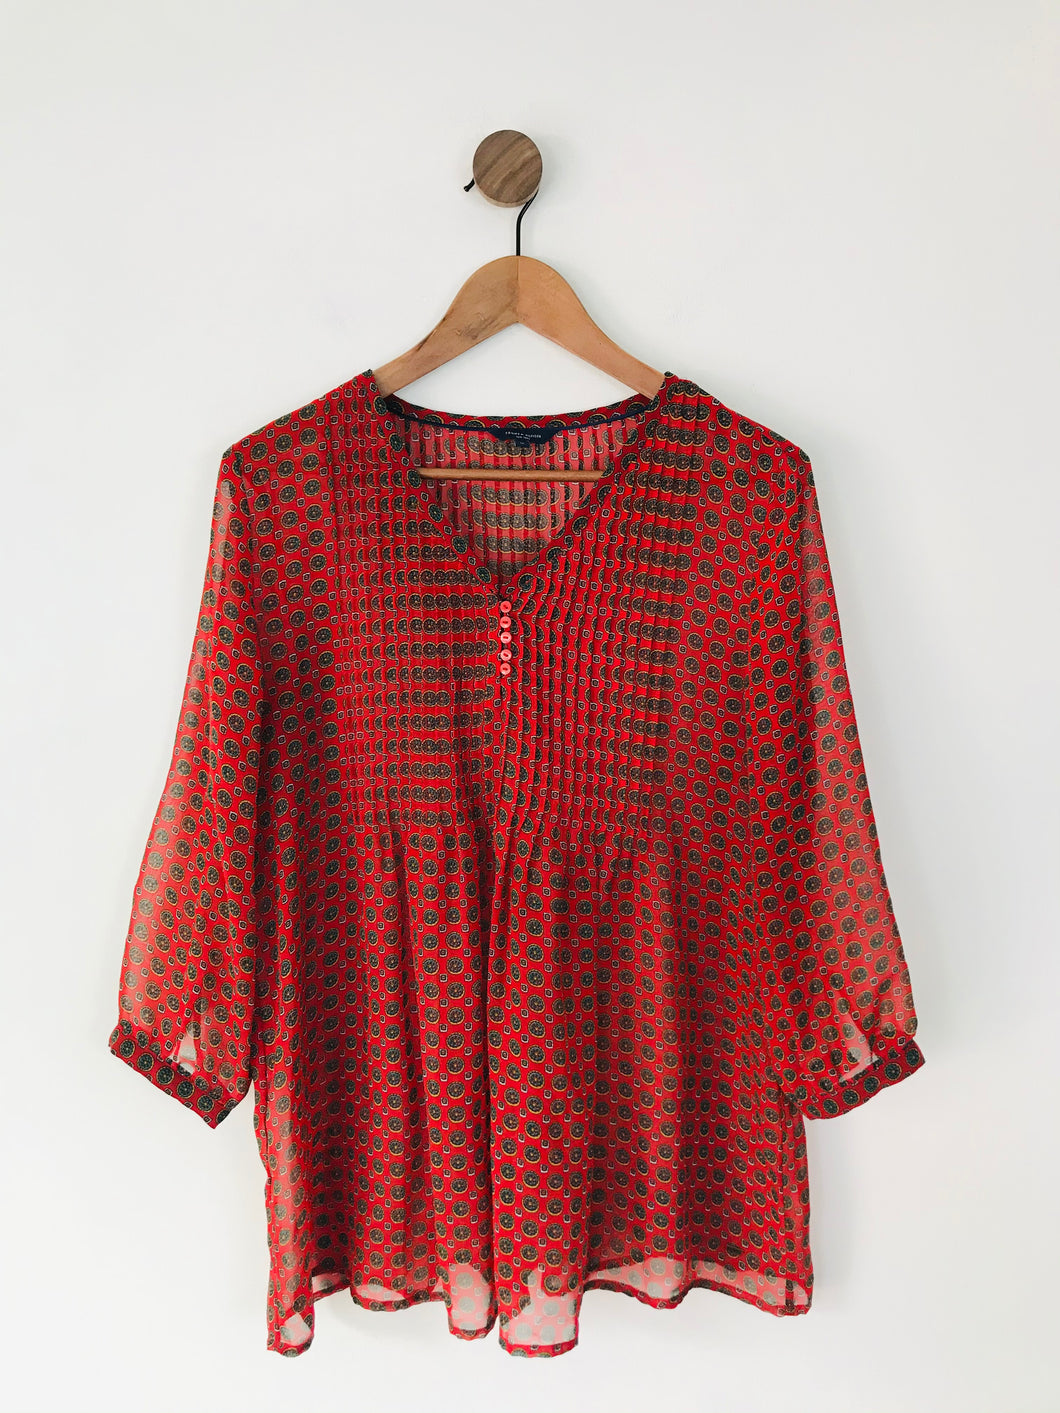 Tommy Hilfiger Women’s Pin Tuck Blouse | M UK10-12 | Red